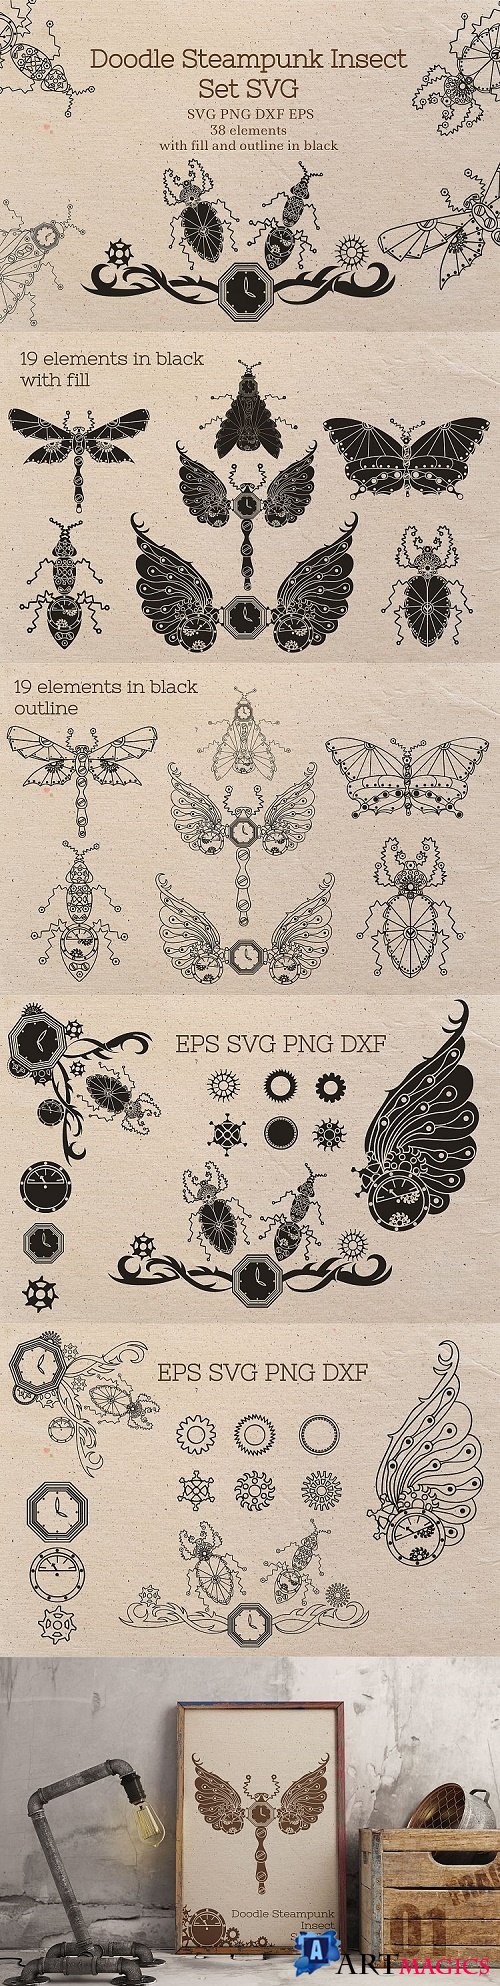 Doodle Steampunk Insect Set SVG  - 472464